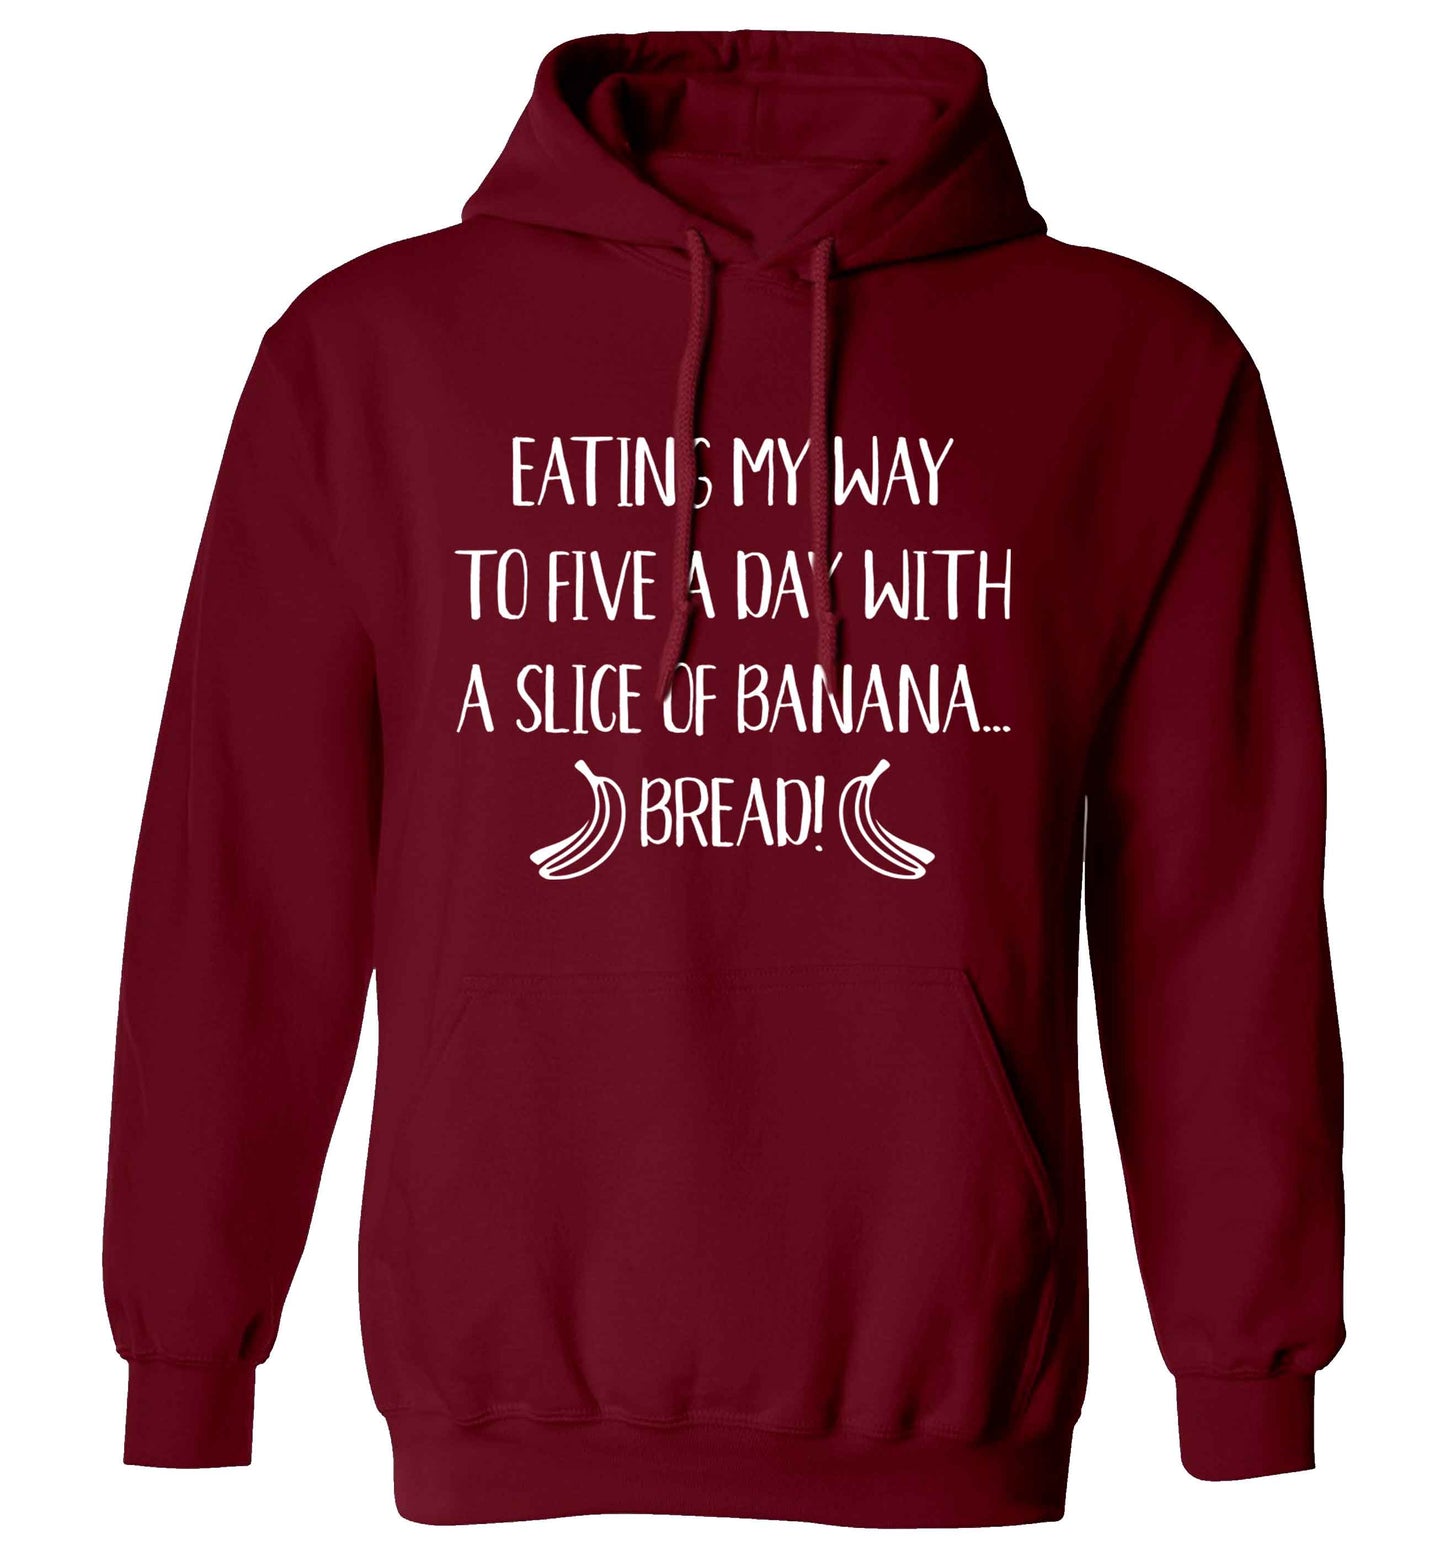 Eating my way to five a day with a slice of banana bread adults unisex maroon hoodie 2XL